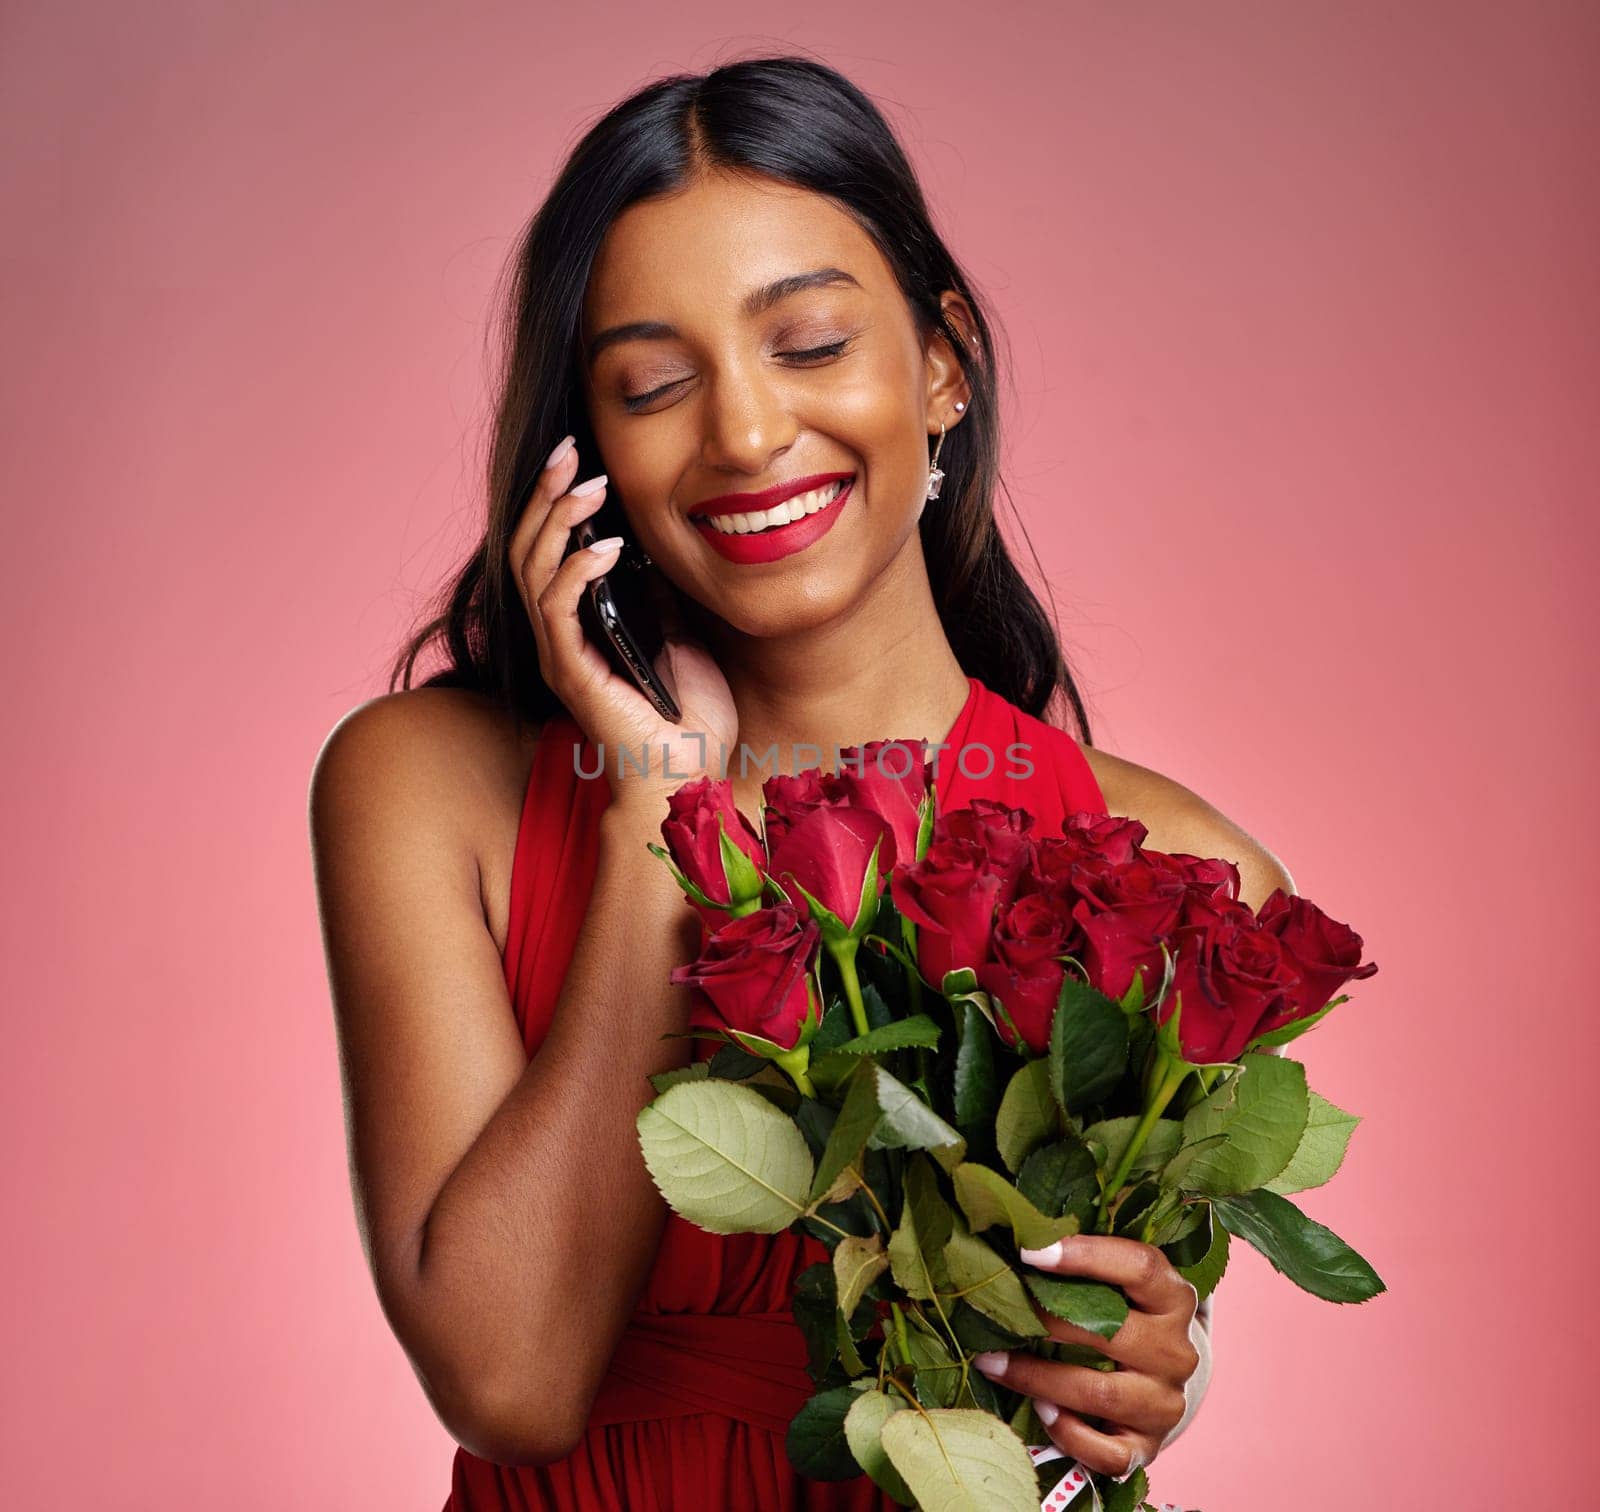 Phone call, talking and a happy woman with flowers on a studio background for valentines day. Laugh, model and face of a young Indian girl with a rose bouquet and smartphone for romance or love.